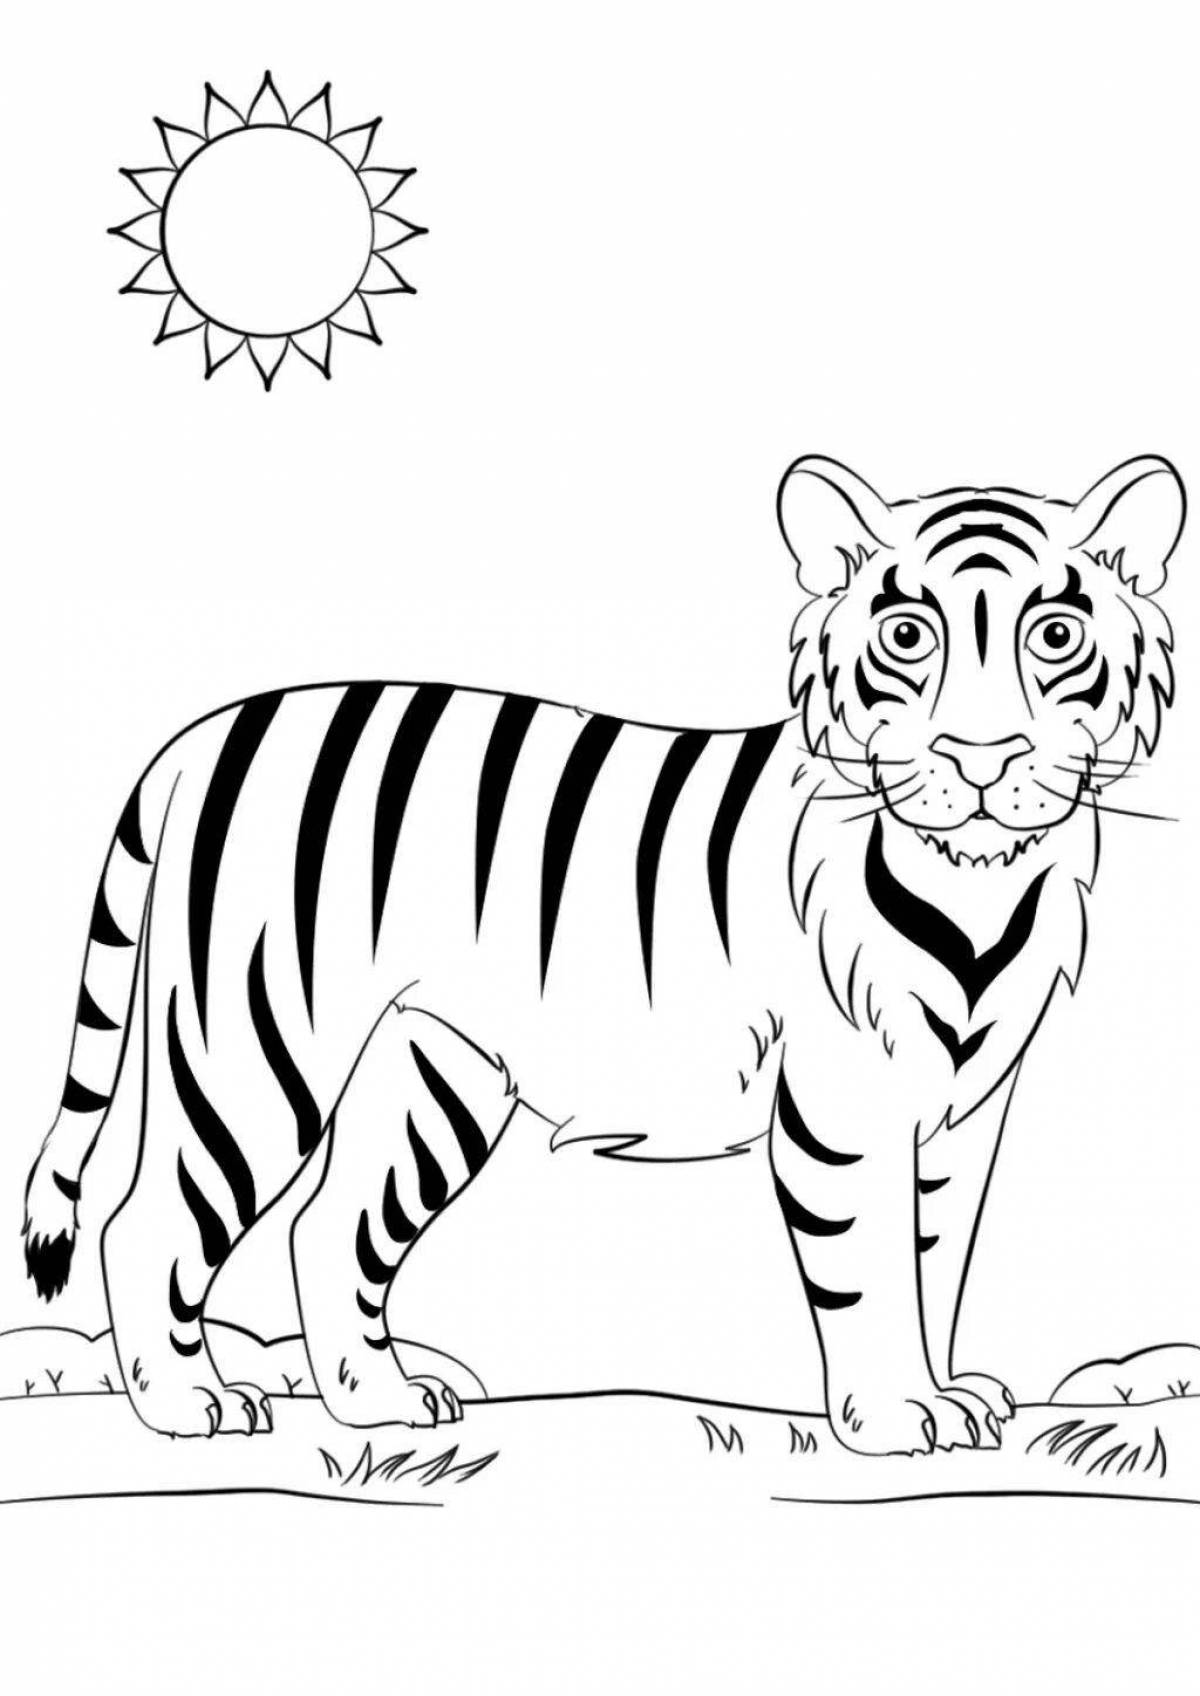 Outstanding tiger coloring page for kids